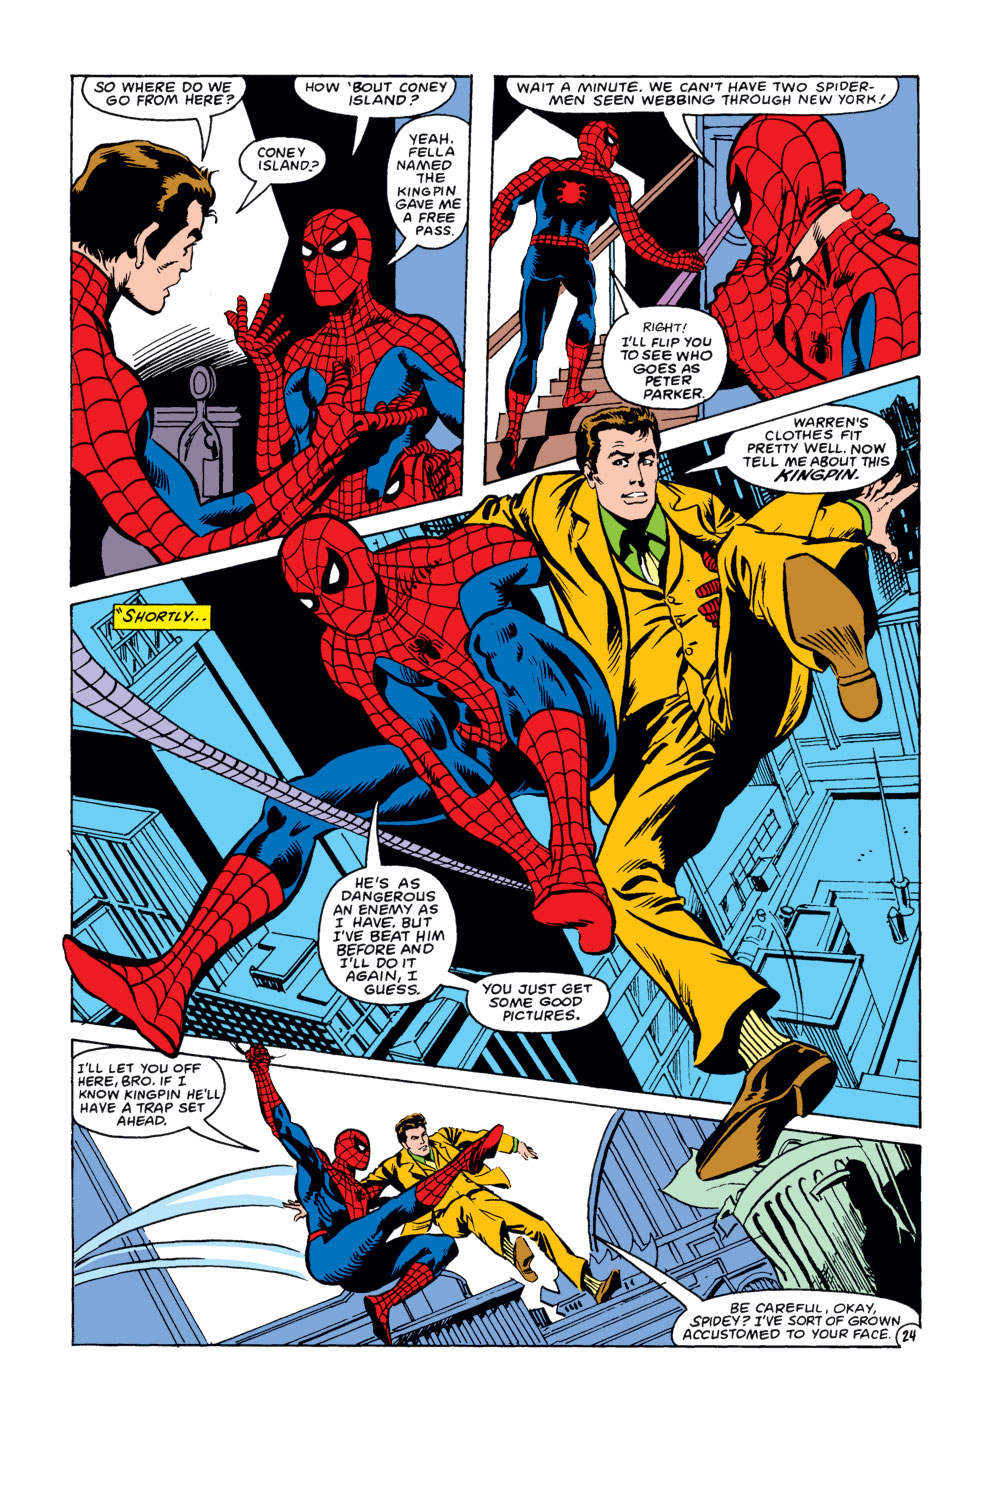 What If? (1977) issue 30 - Spider-Man's clone lived - Page 25